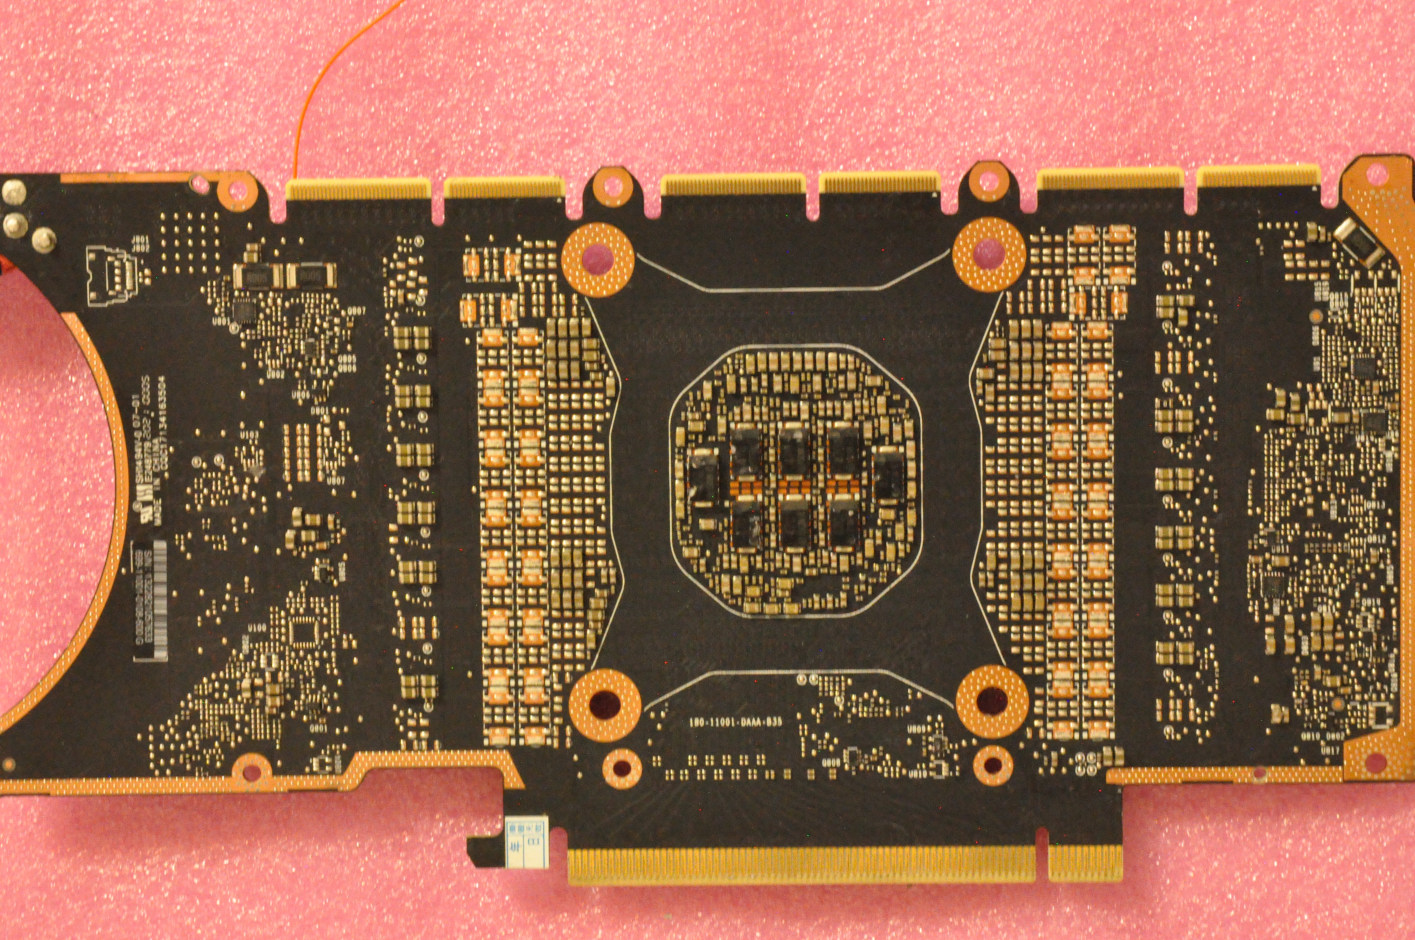 Back side of the bare PCB